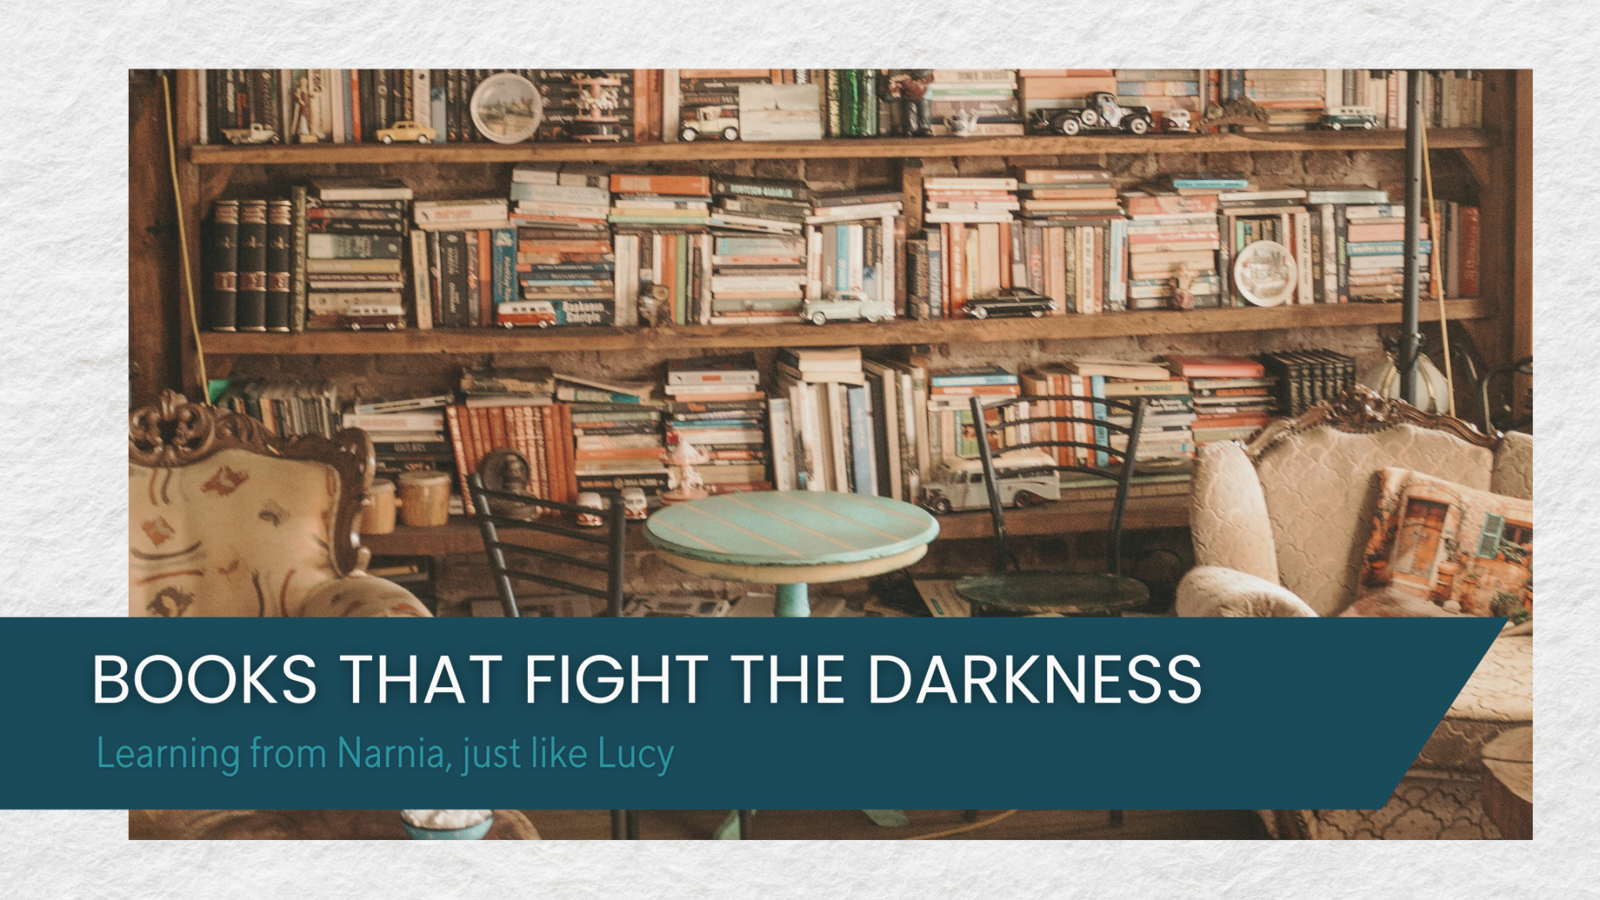 Books that fight the darkness: Learning from Narnia, just like Lucy